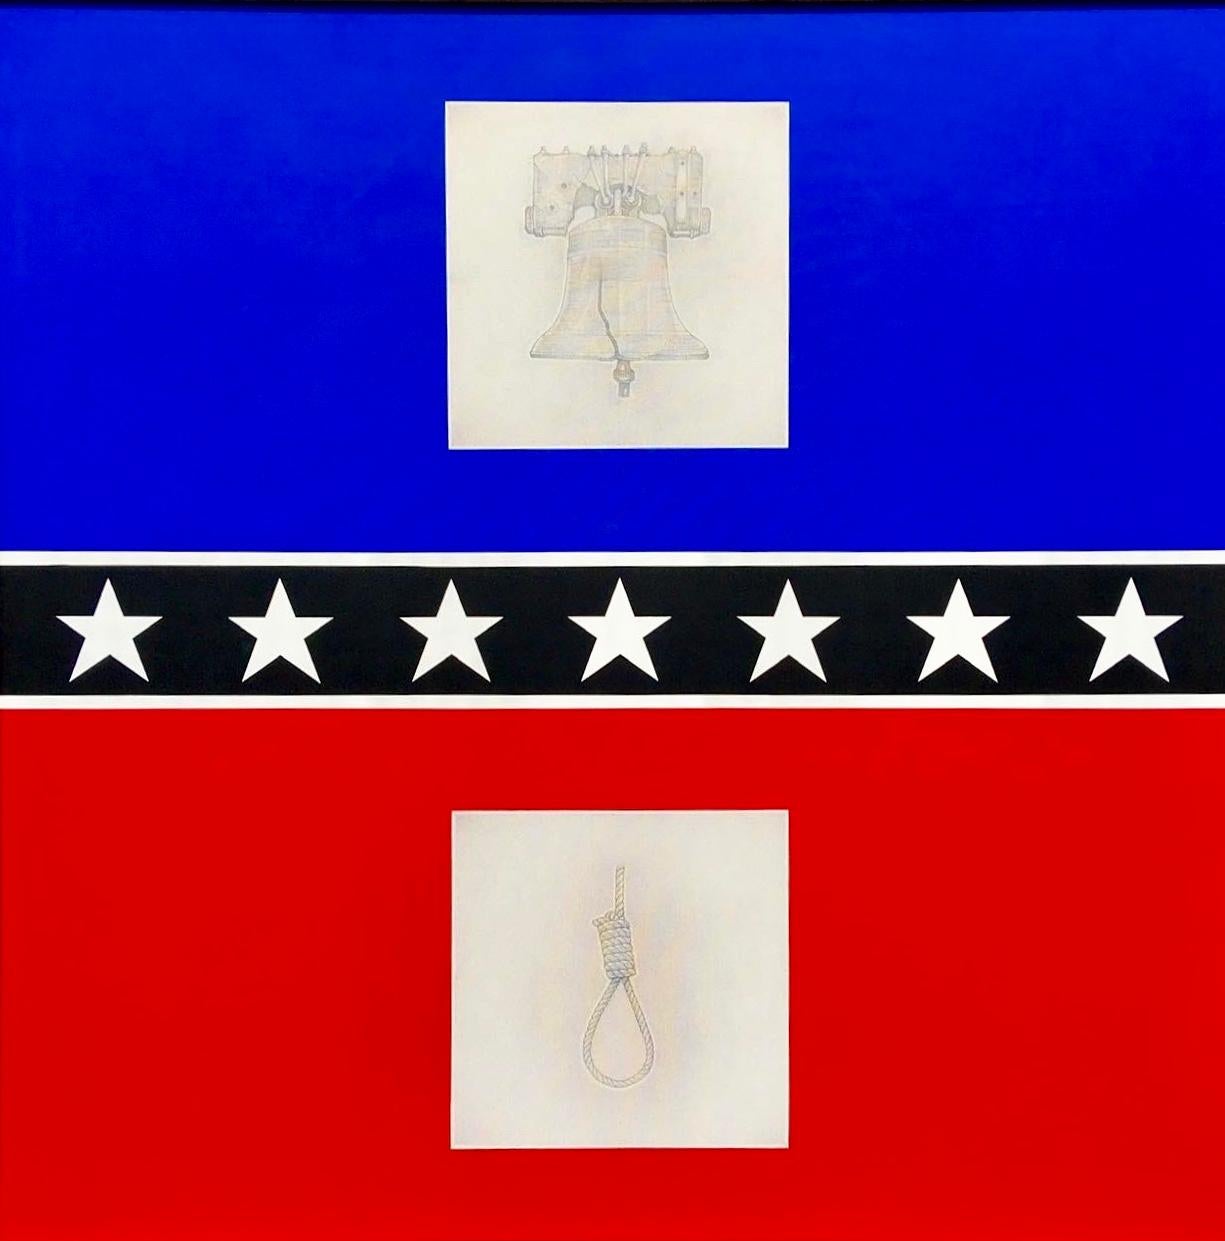 The Mason / Dixon Line: Contemporary Political Square Painting in Red and Blue